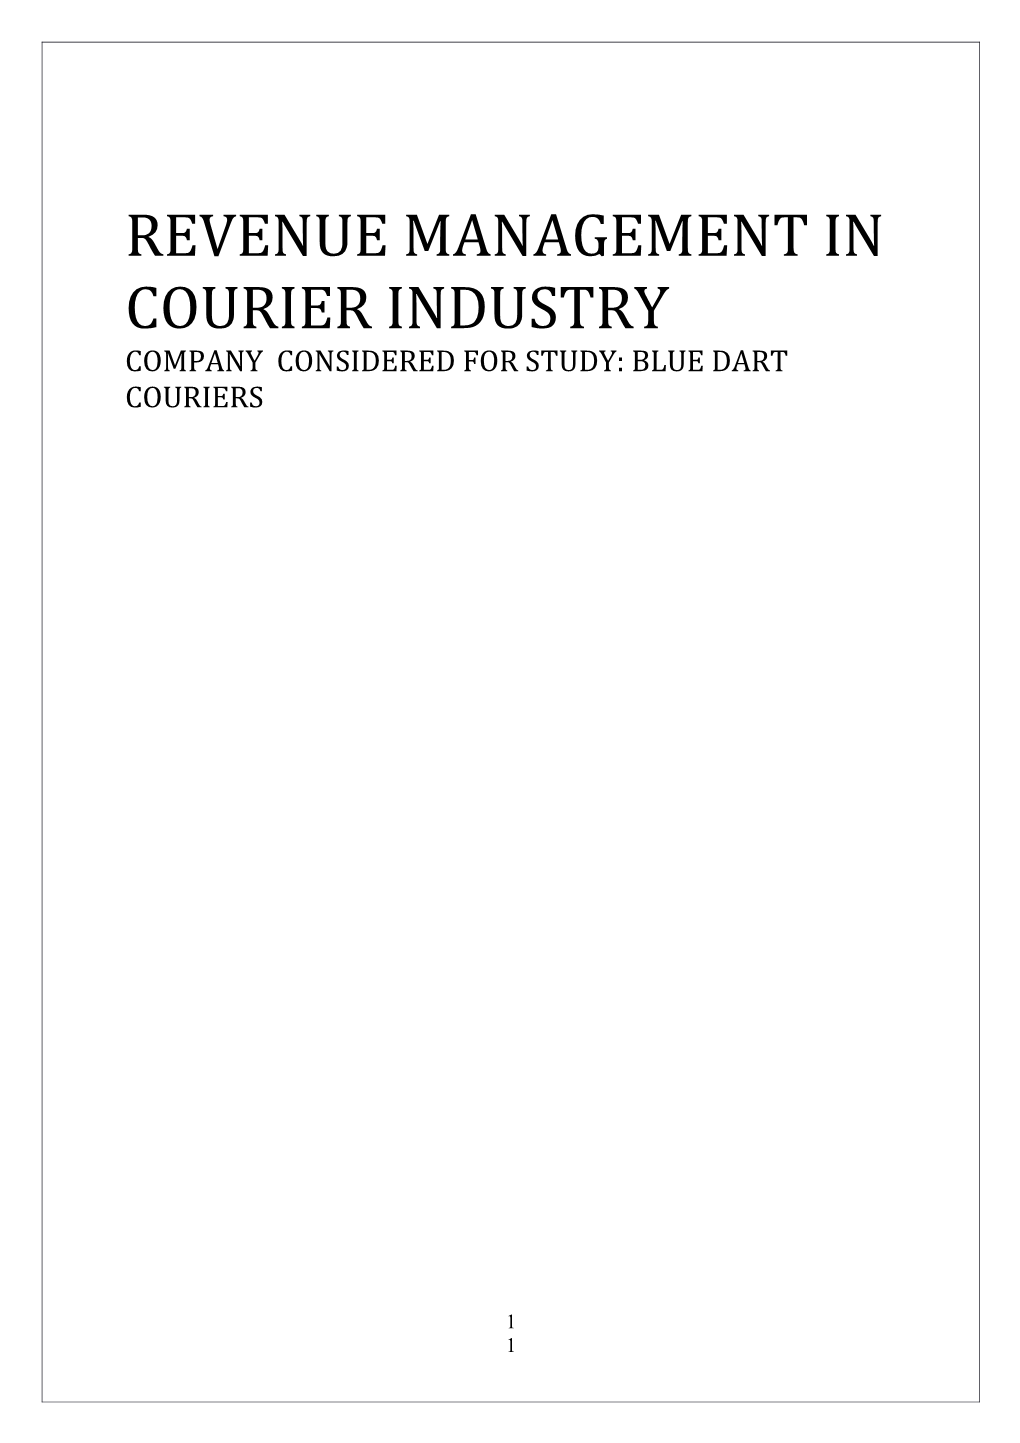 Revenue Management in Courier Industry